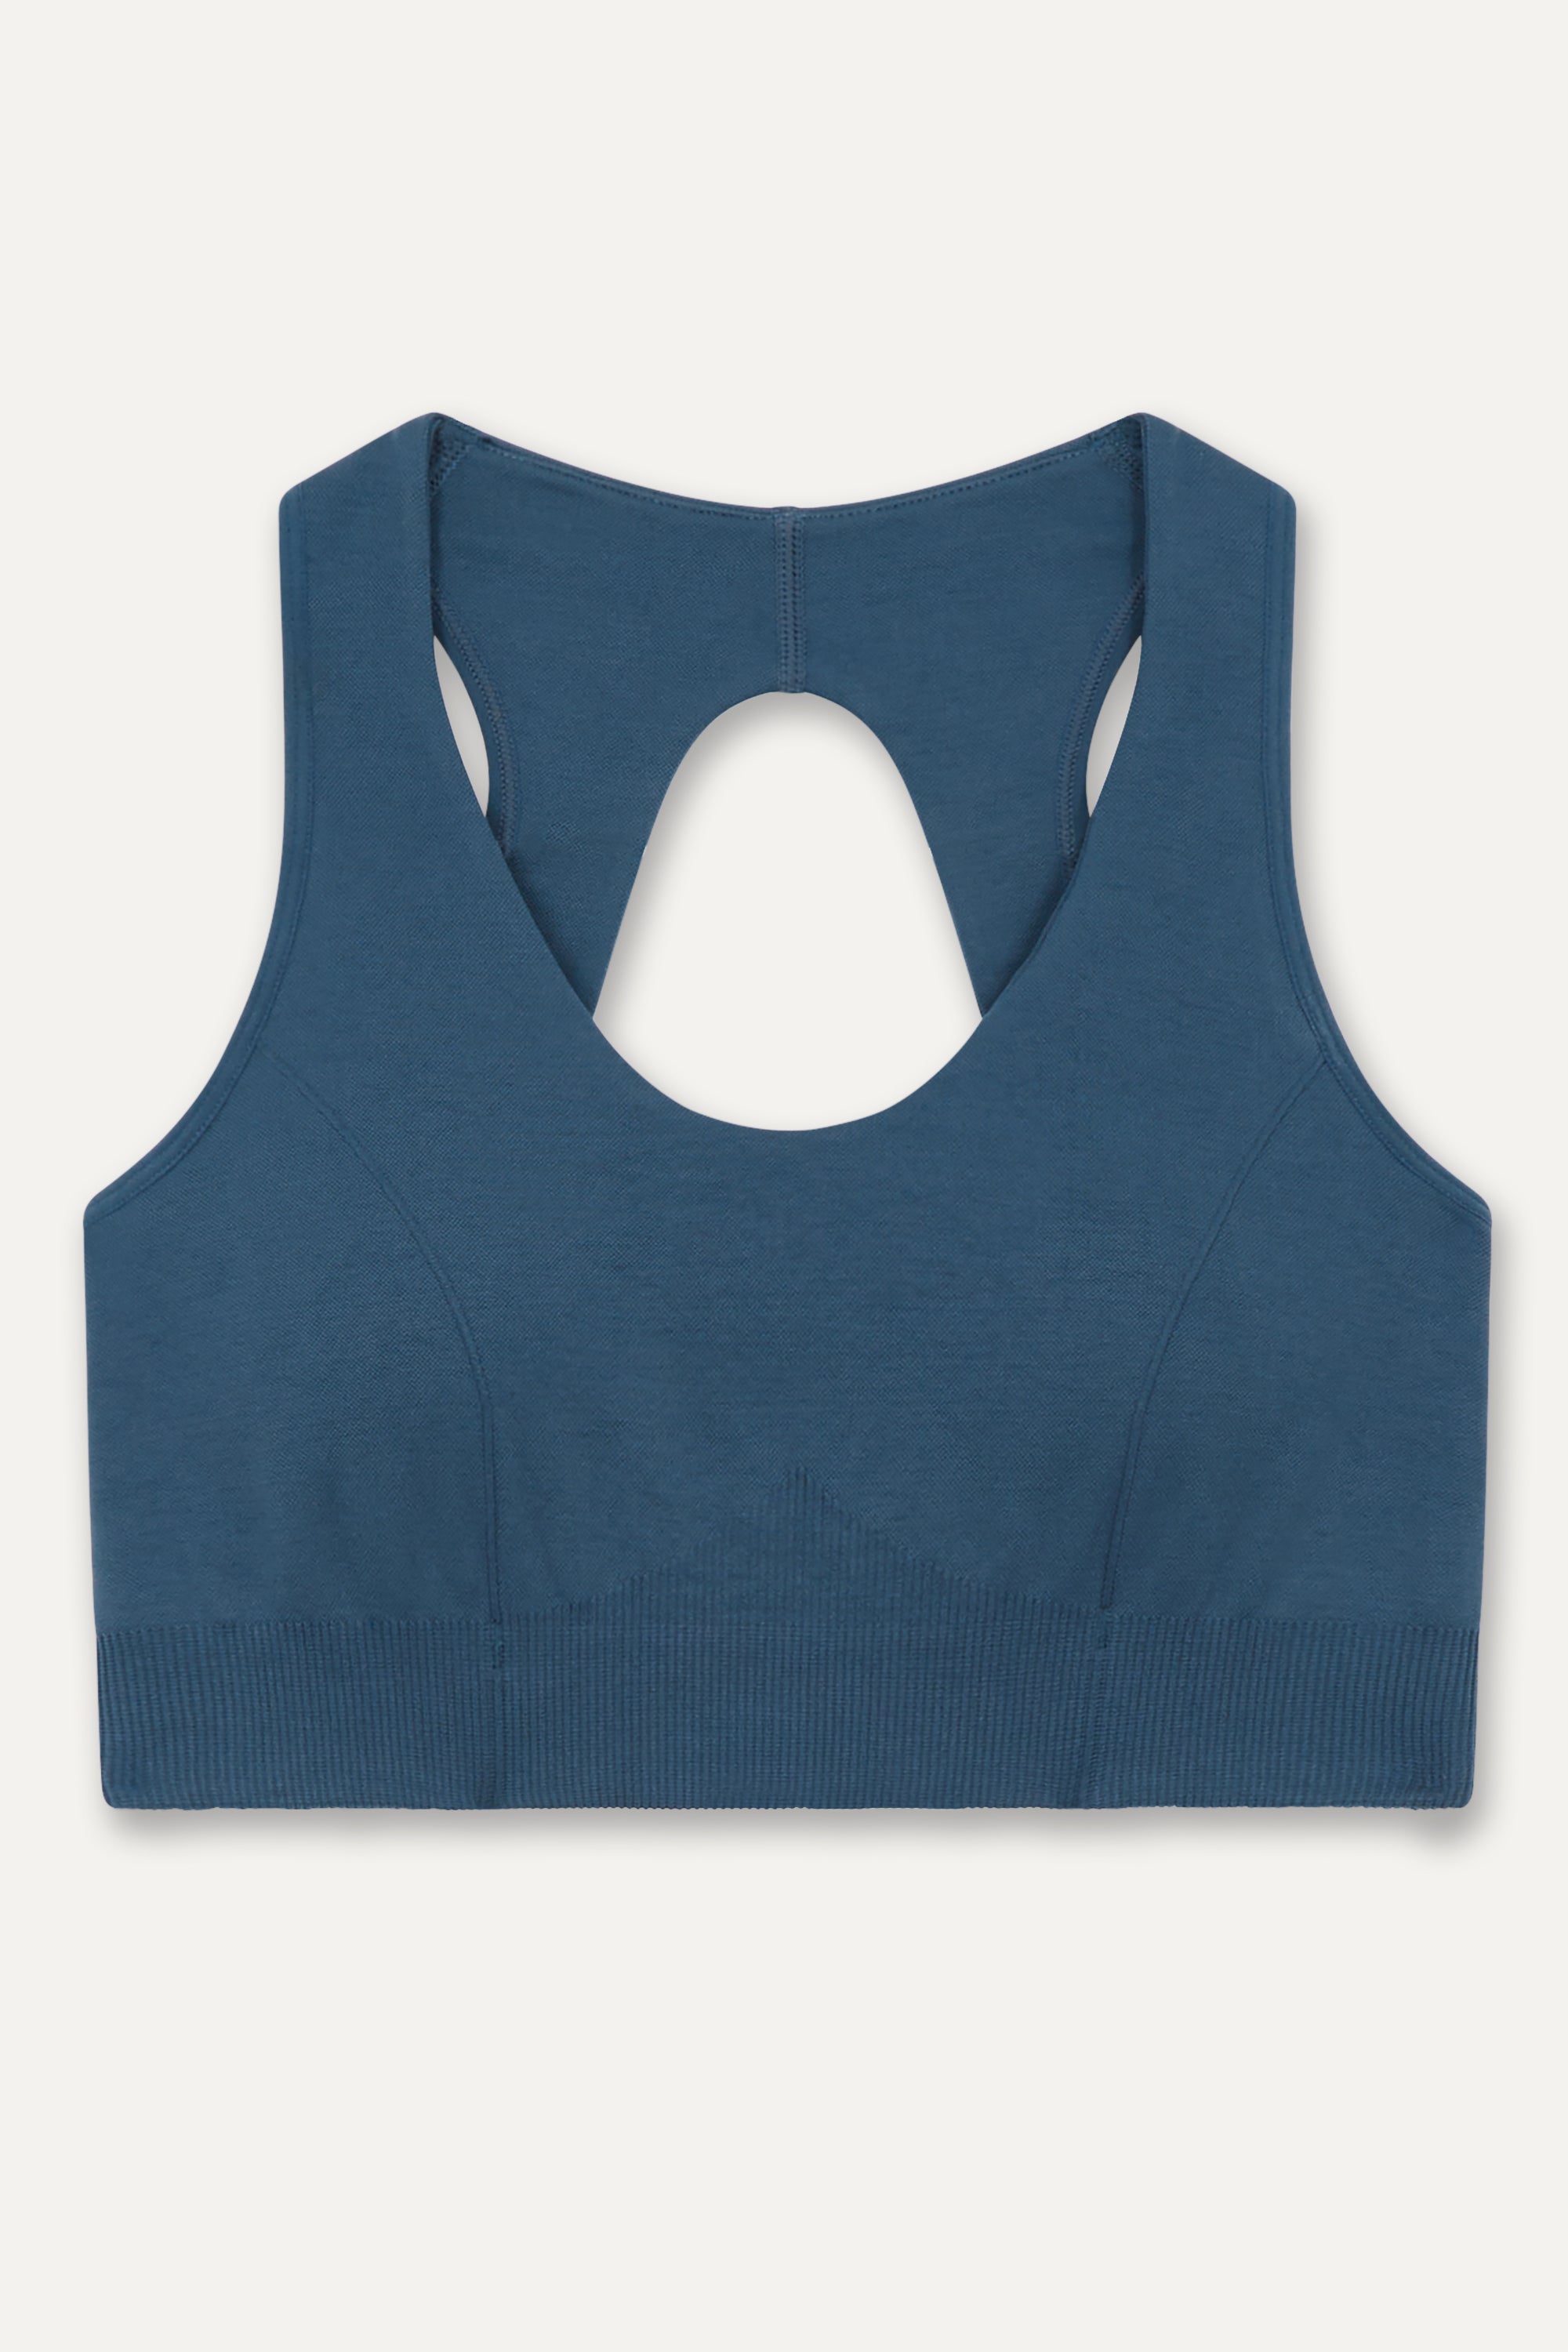 Blue V neck recycled supportive sports bra and leggings from sustainable women's activewear brand Jilla  